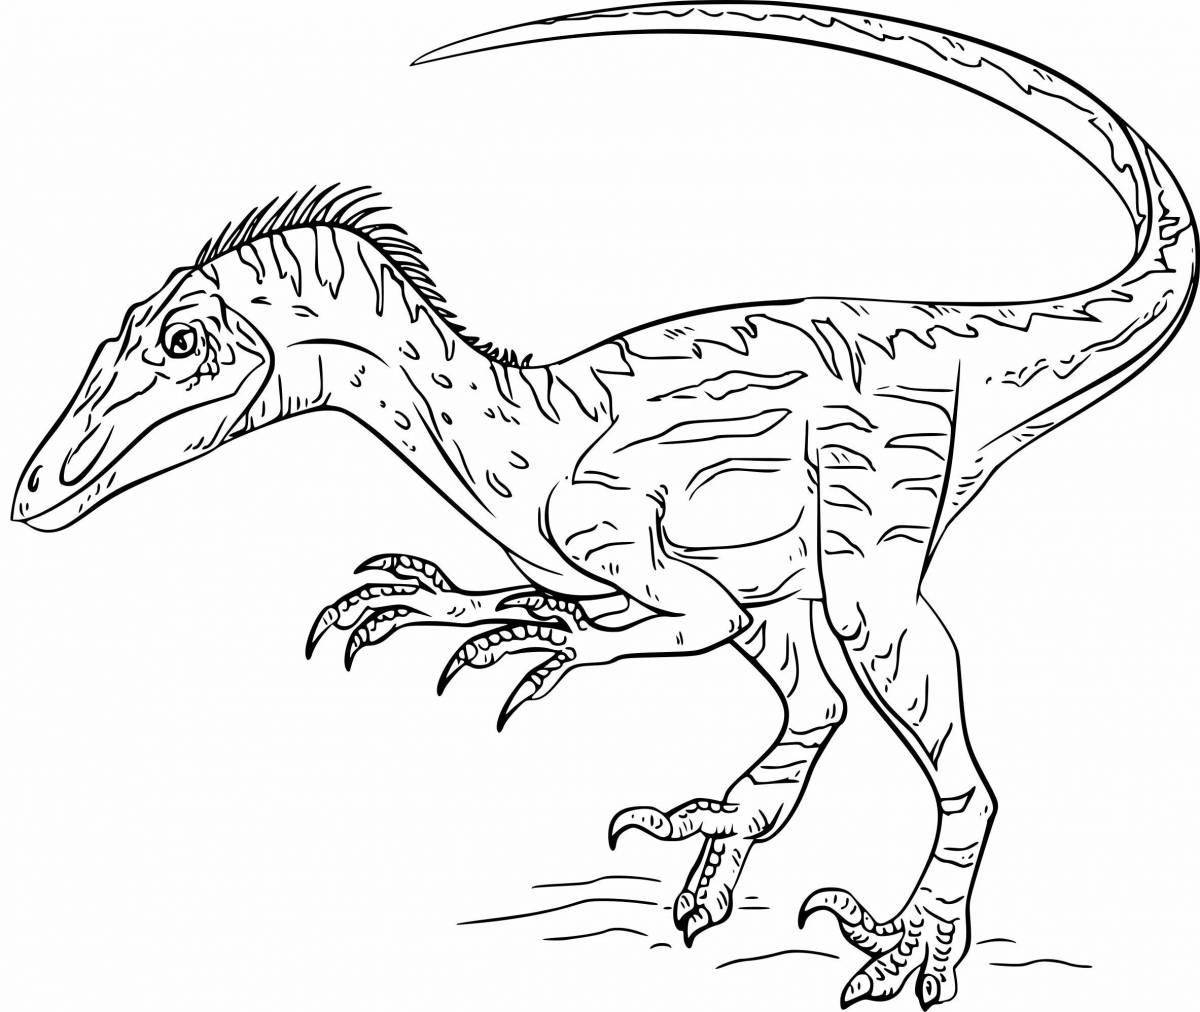 Richly colored velociraptor blue coloring page